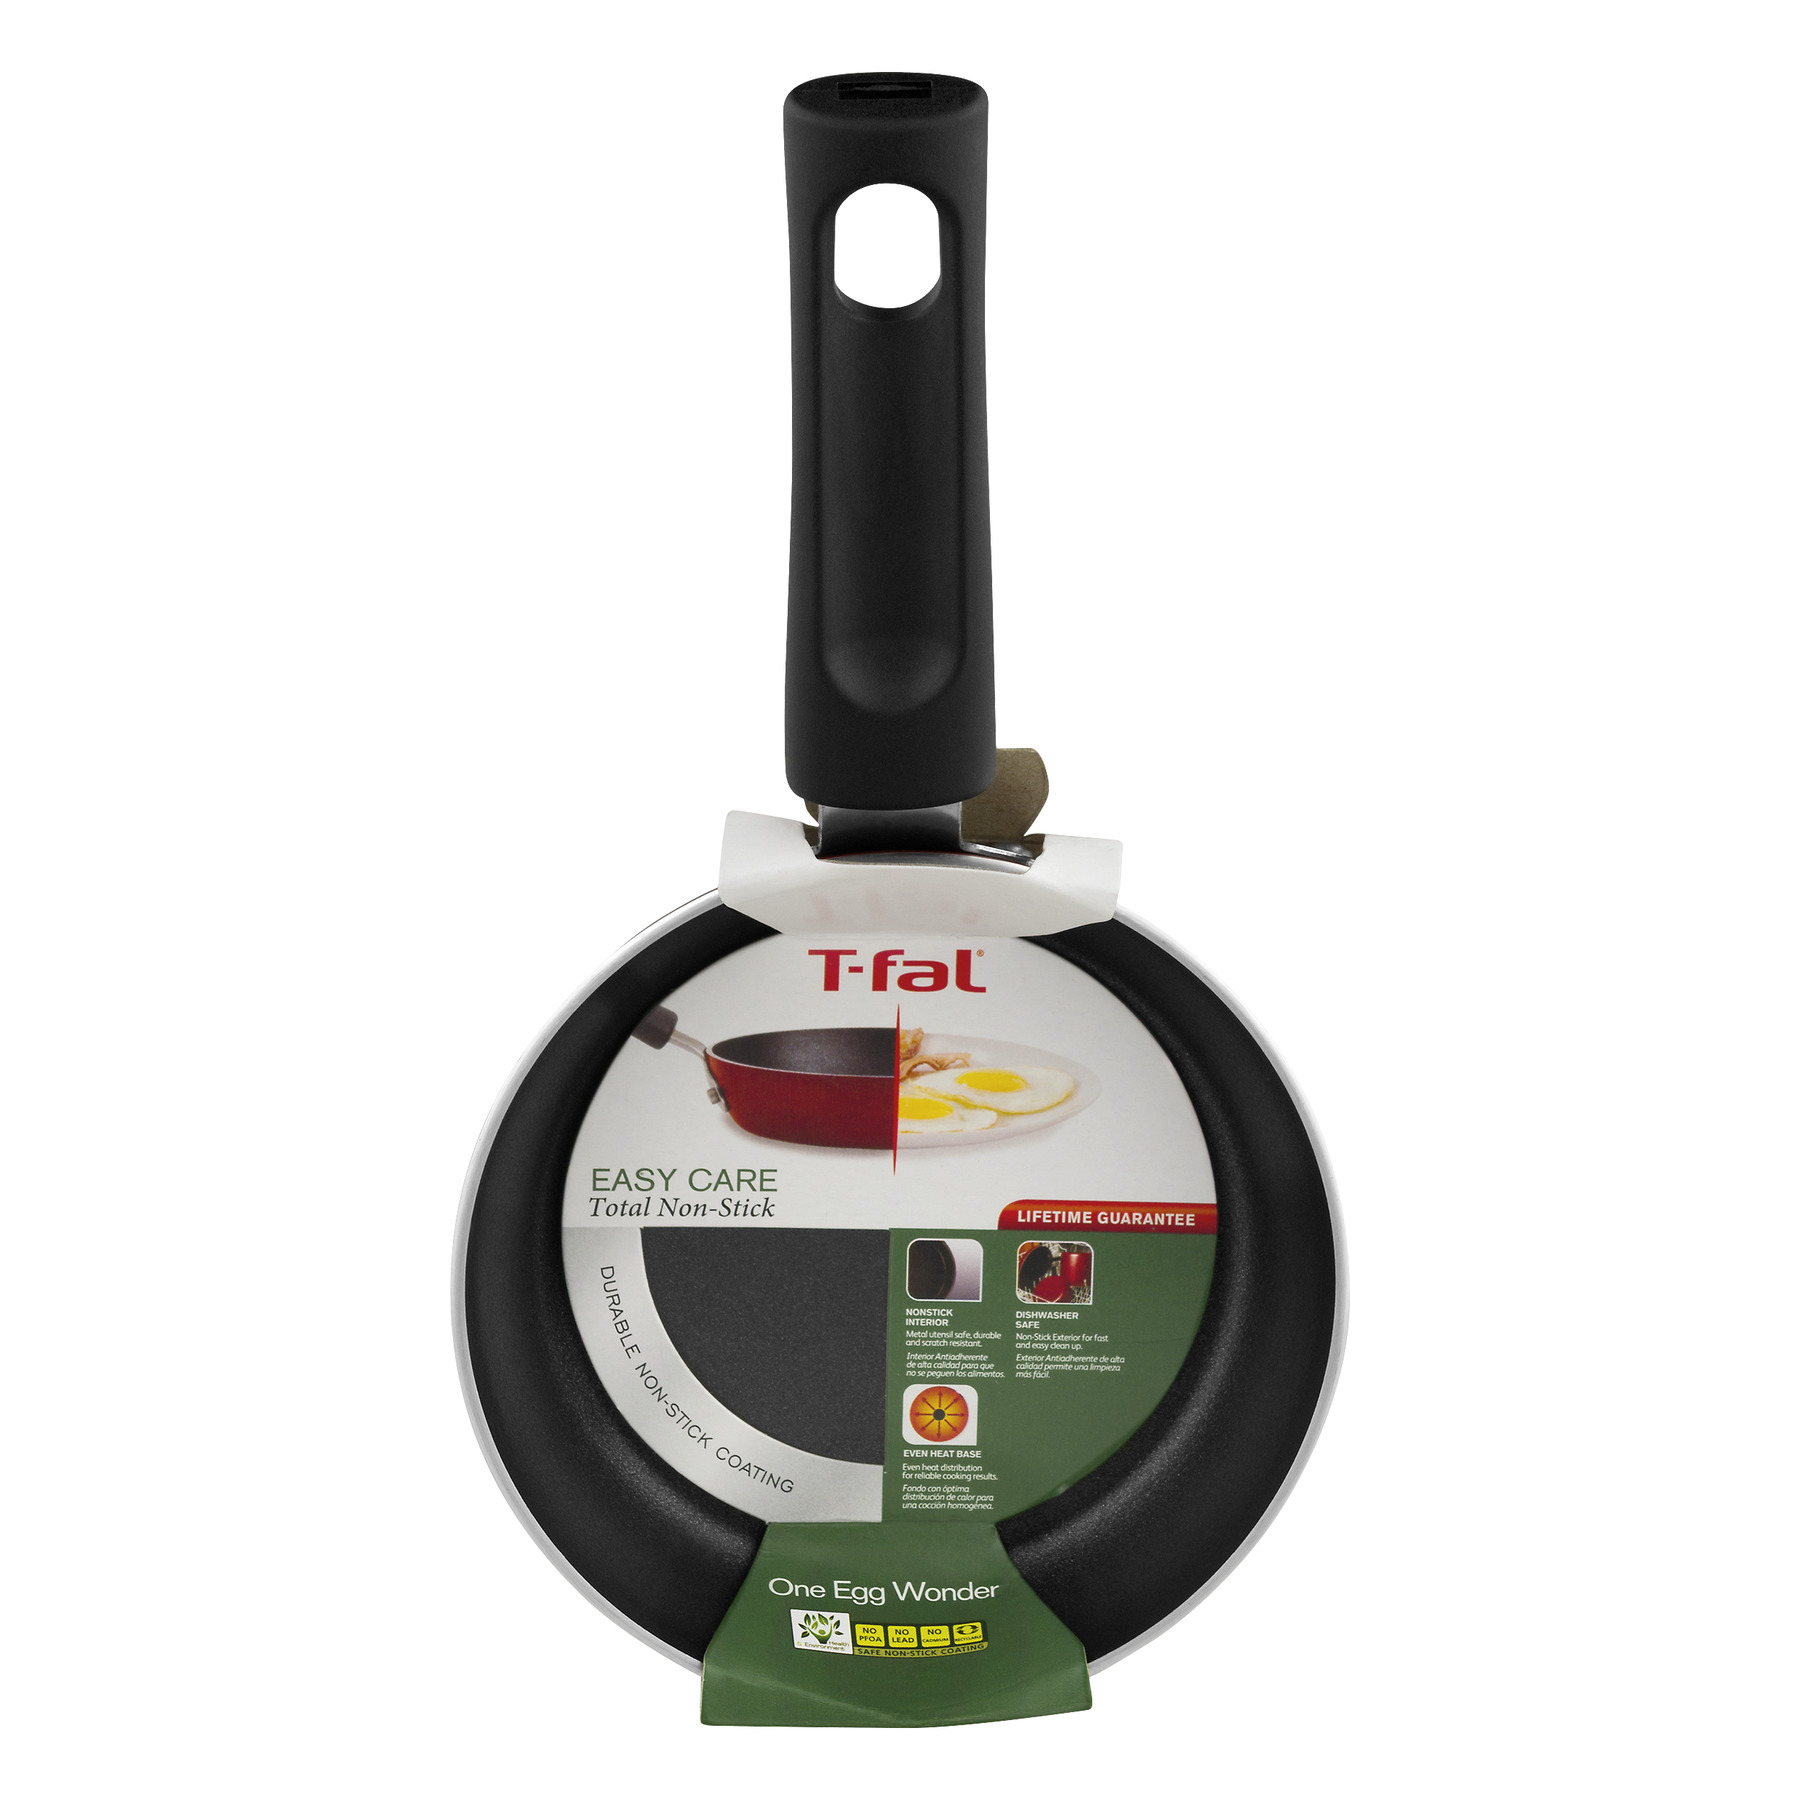 T-fal, Specialty Nonstick, One Egg Wonder 4.5 In. Fry Pan, Red - image 4 of 7